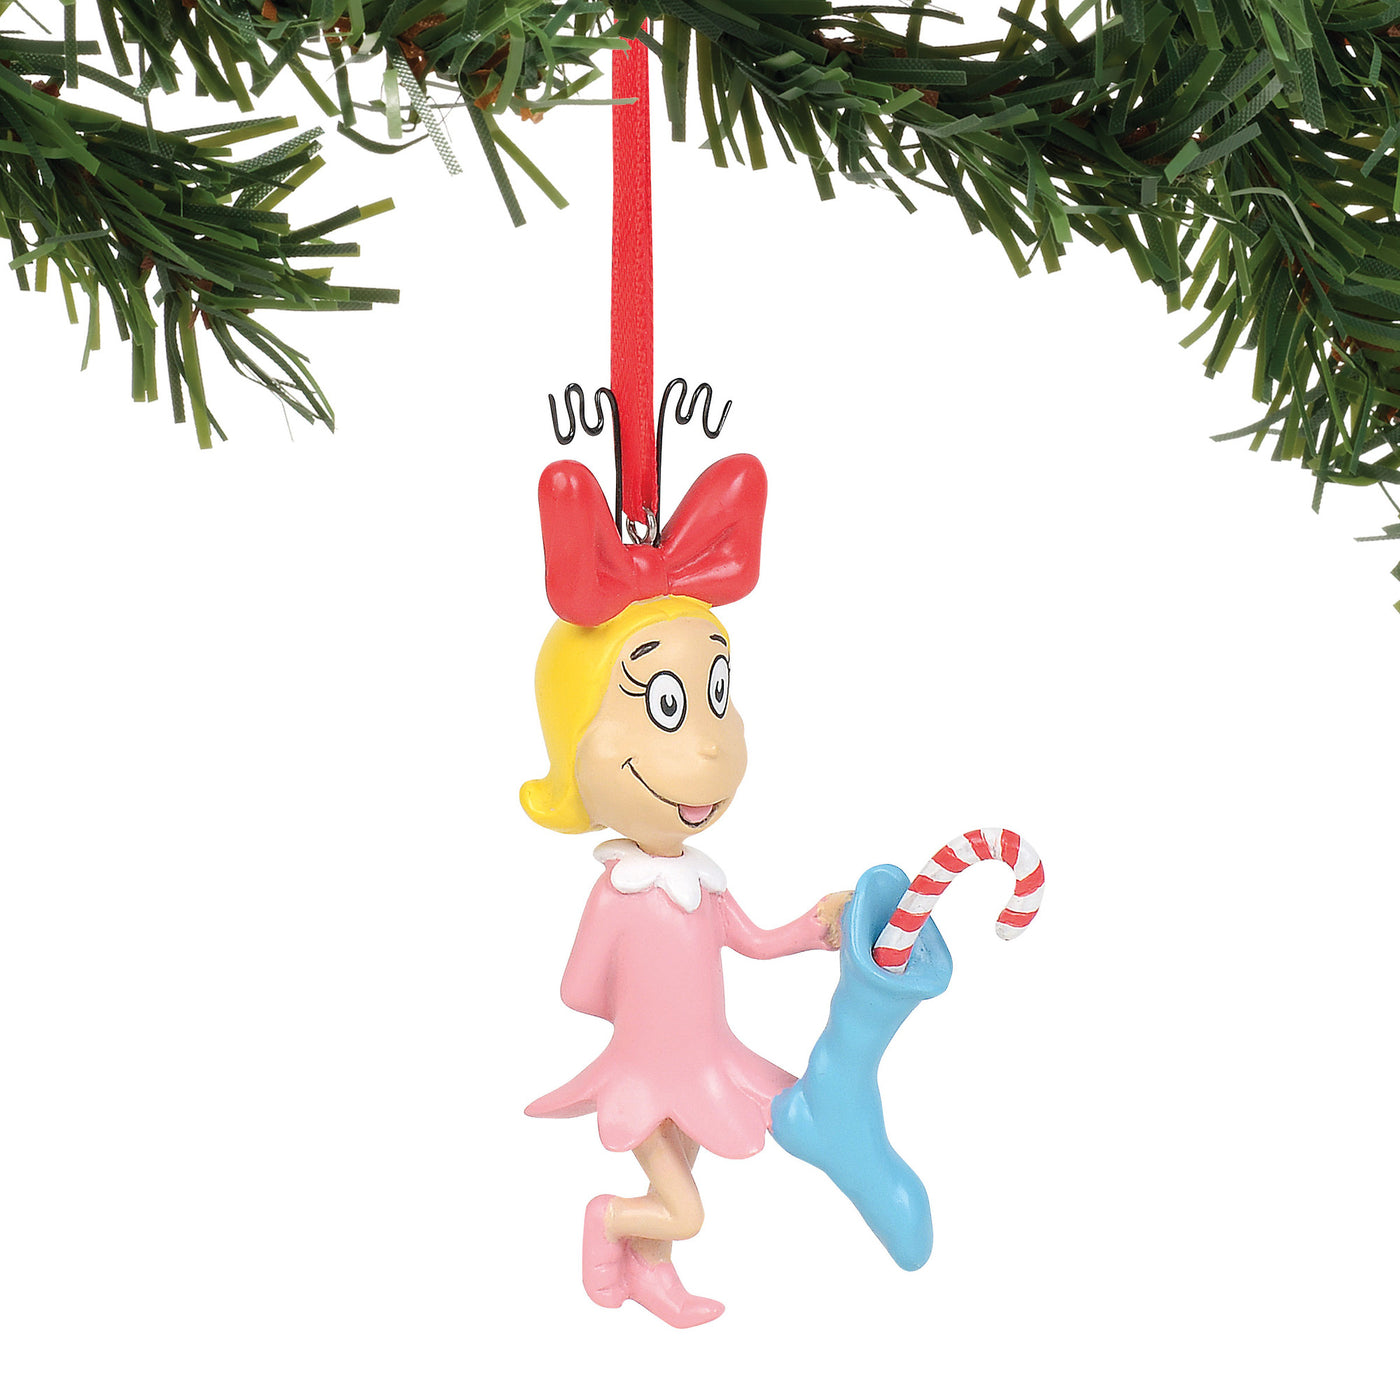 Dr. Seuss Grinch Cindy Lou-Who with Stocking Christmas Ornament New with Box